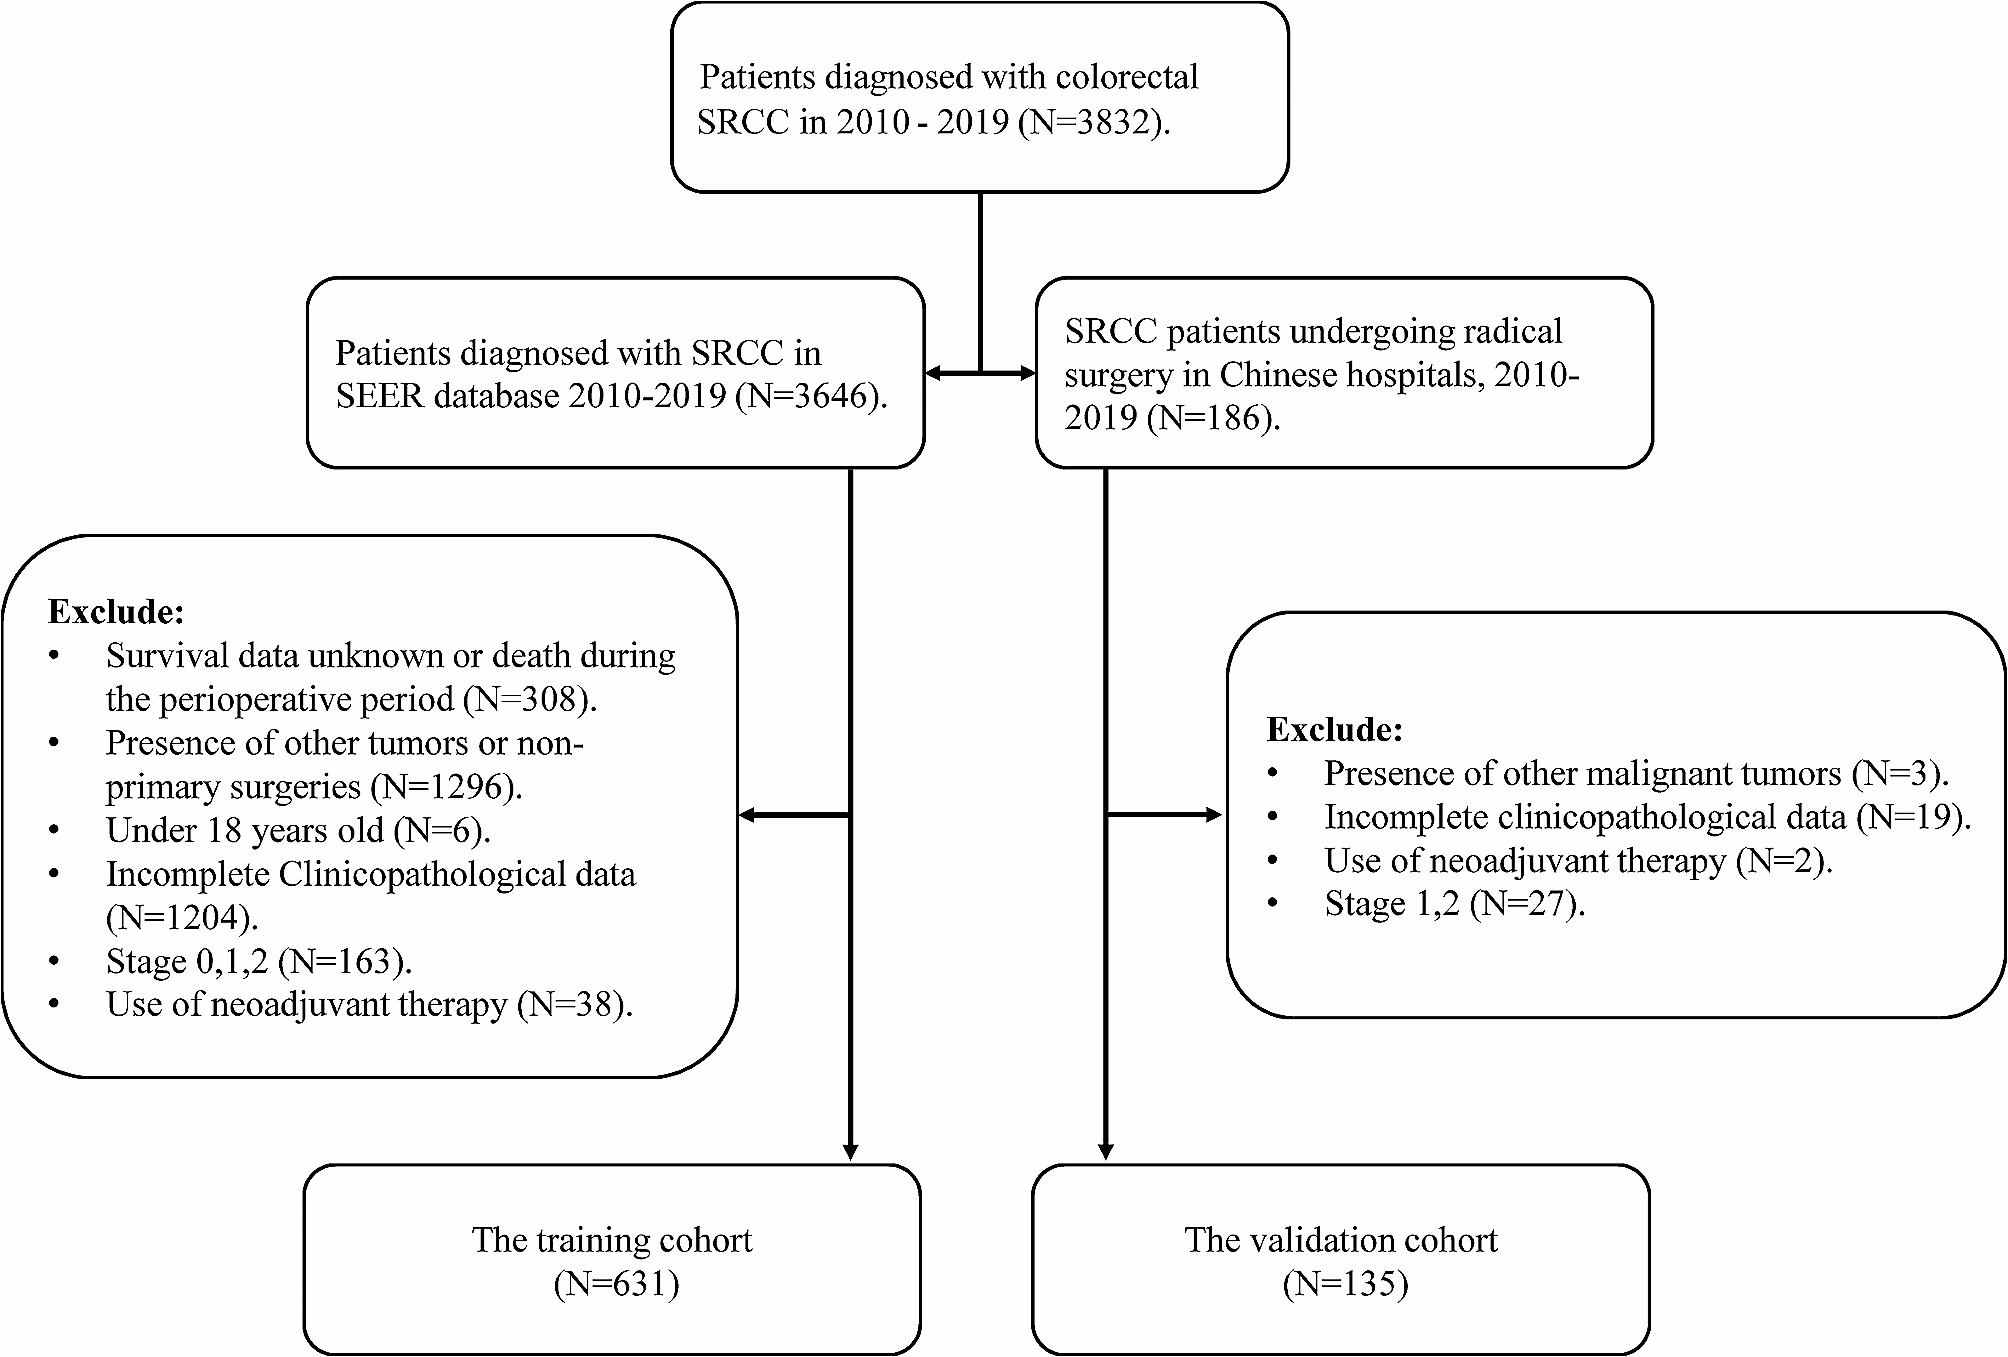 Prognostic and predictive value of tumor deposits in advanced signet ring cell colorectal cancer: SEER database analysis and multicenter validation